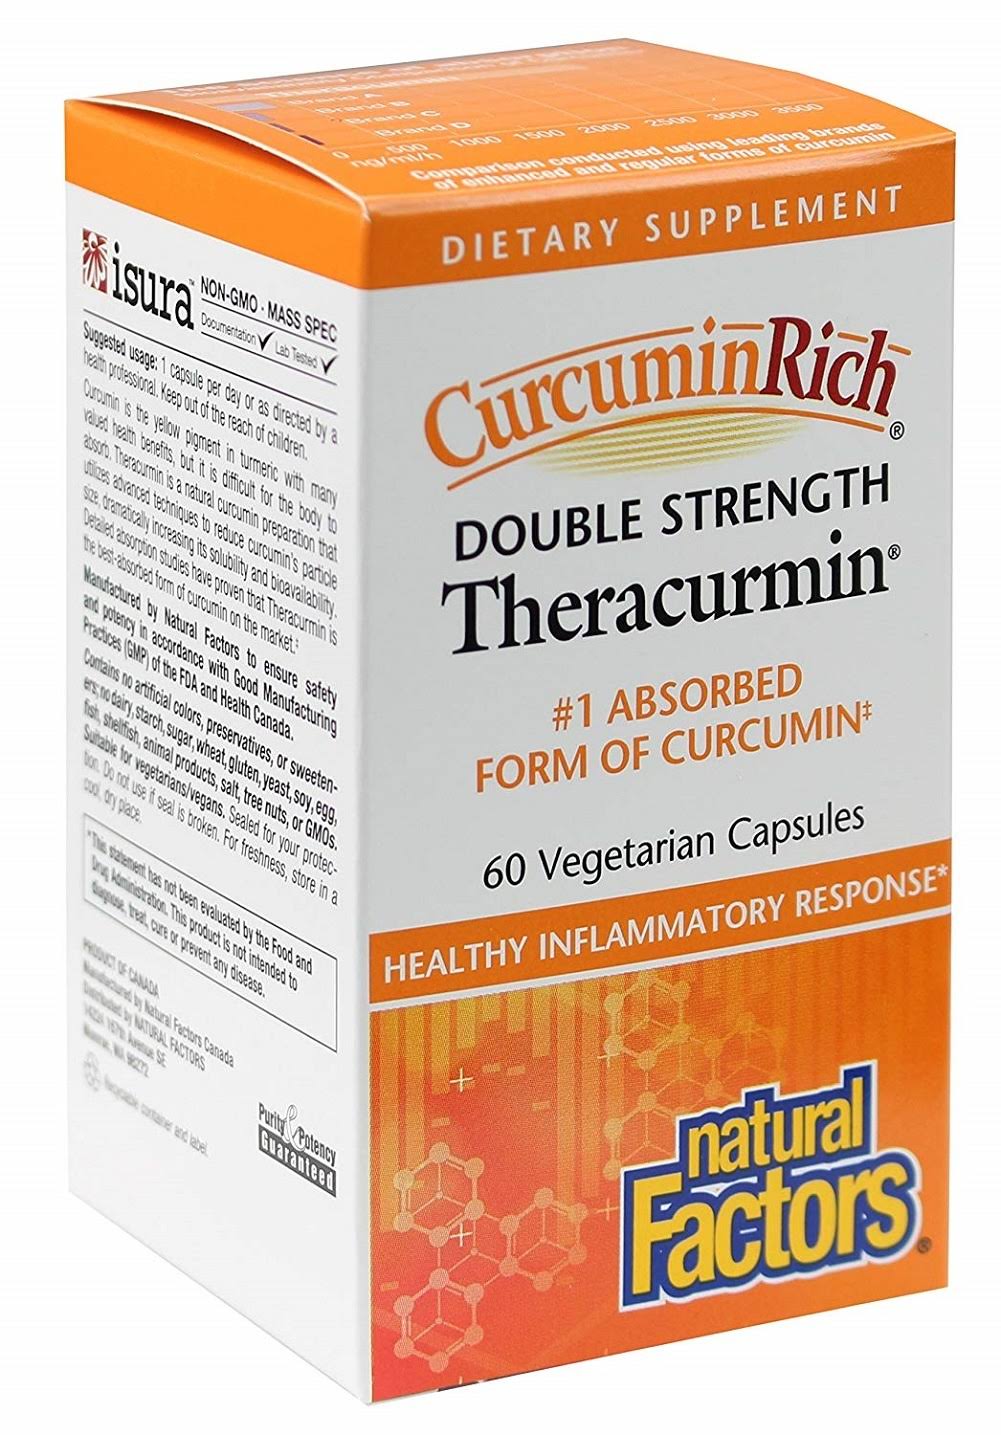 CurcuminRich Double Strength Theracurmin Supplement - 60 Count